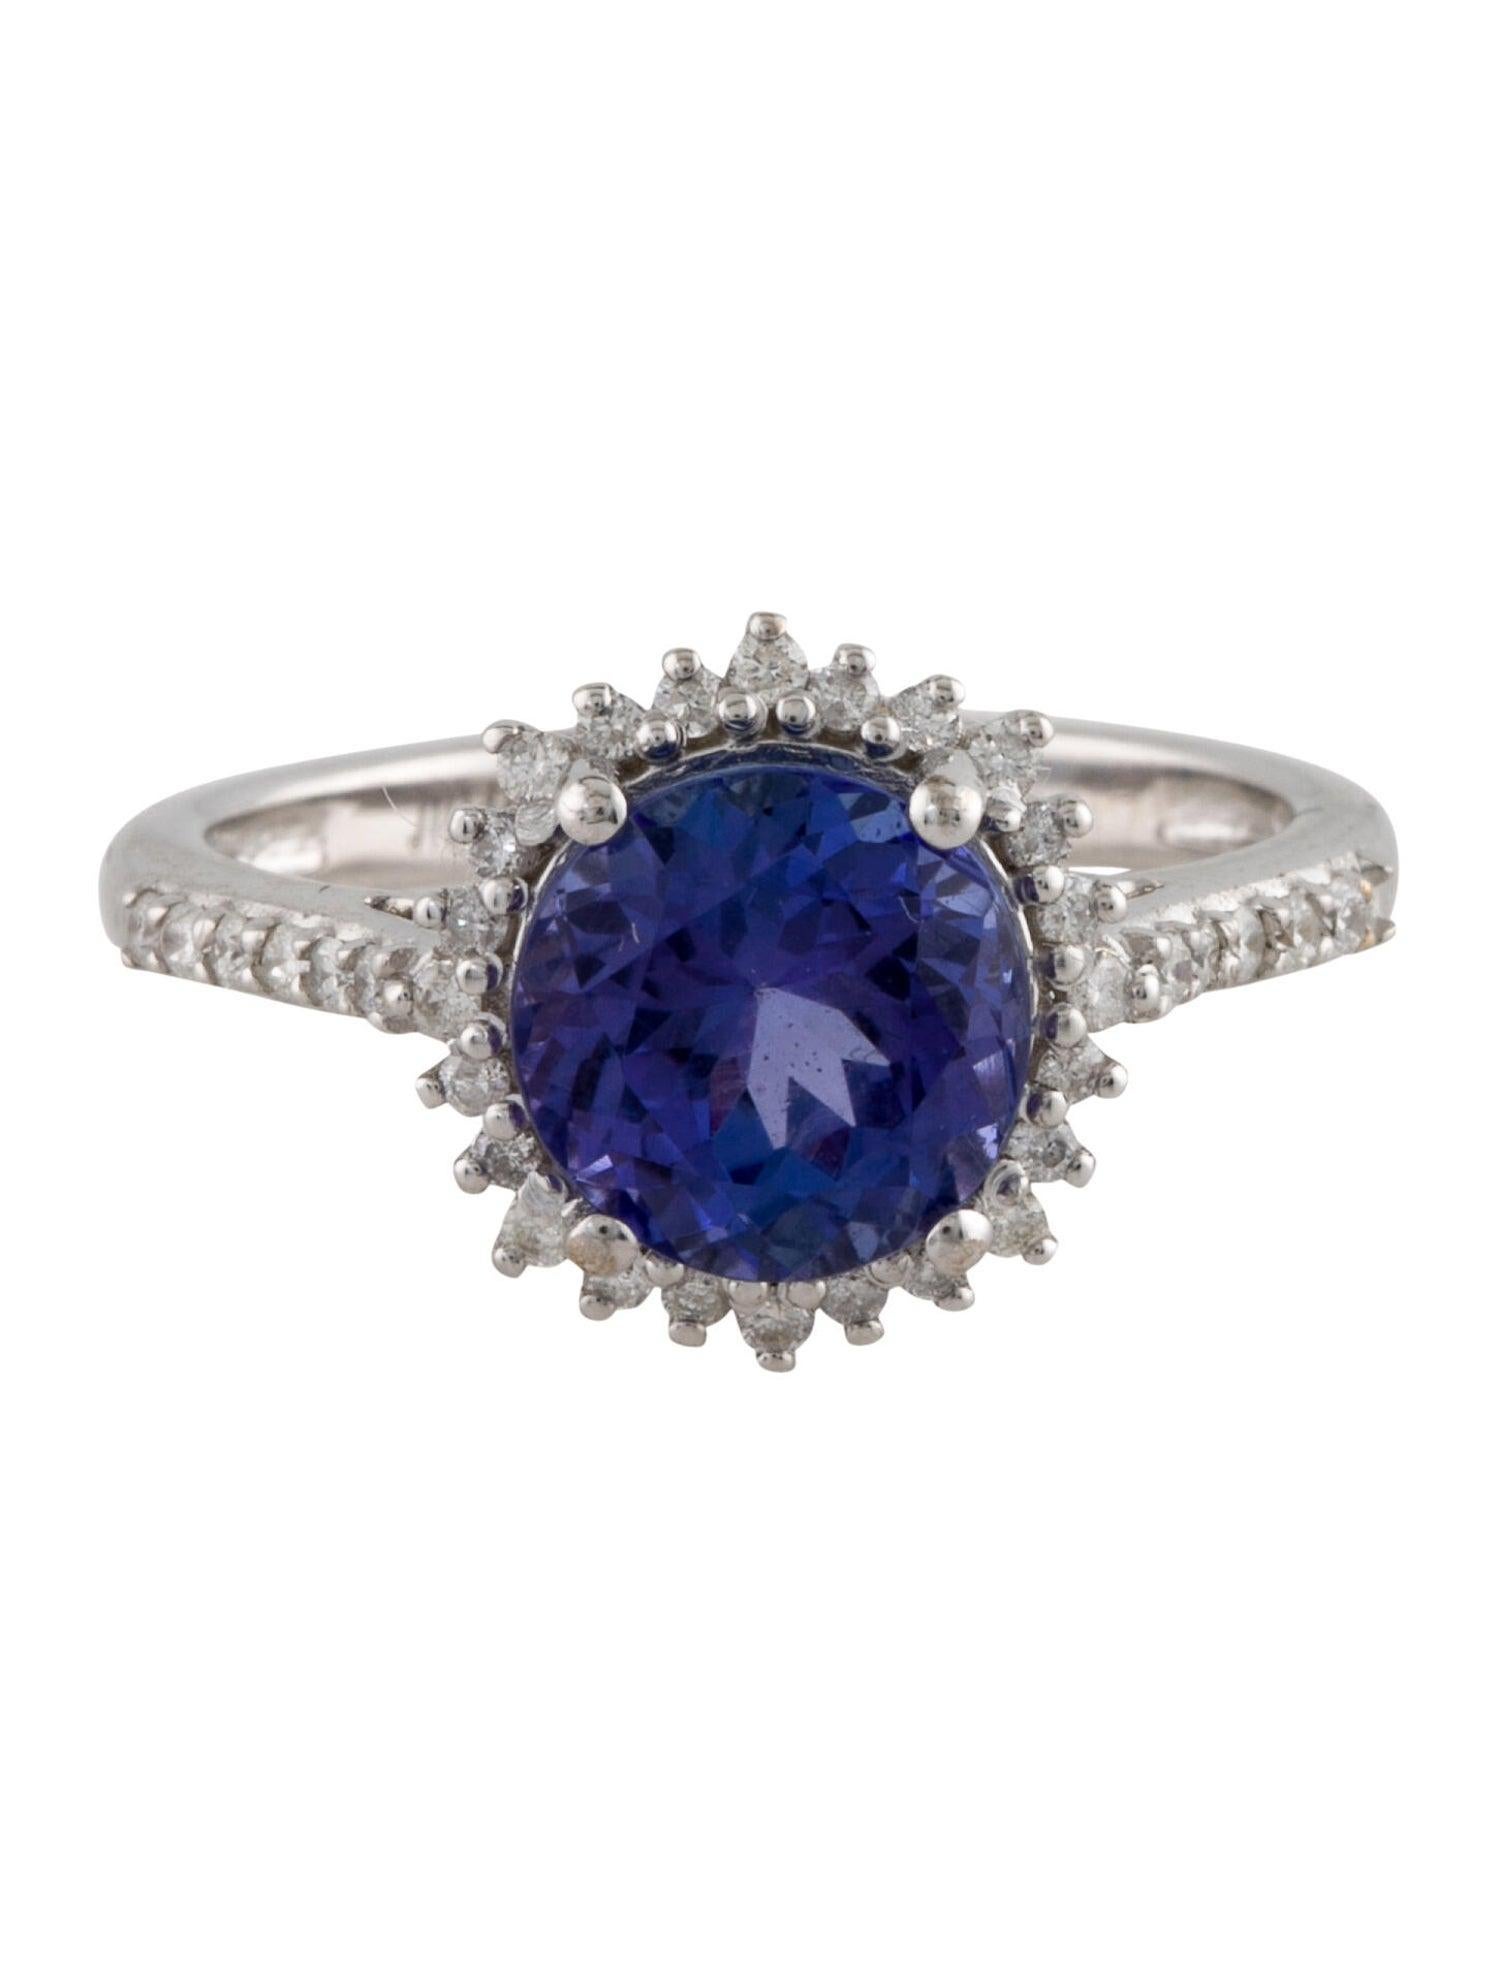 Round Cut Luxurious 14K White Gold Tanzanite & Diamond Cocktail Ring, 2.25ct Round Faceted For Sale